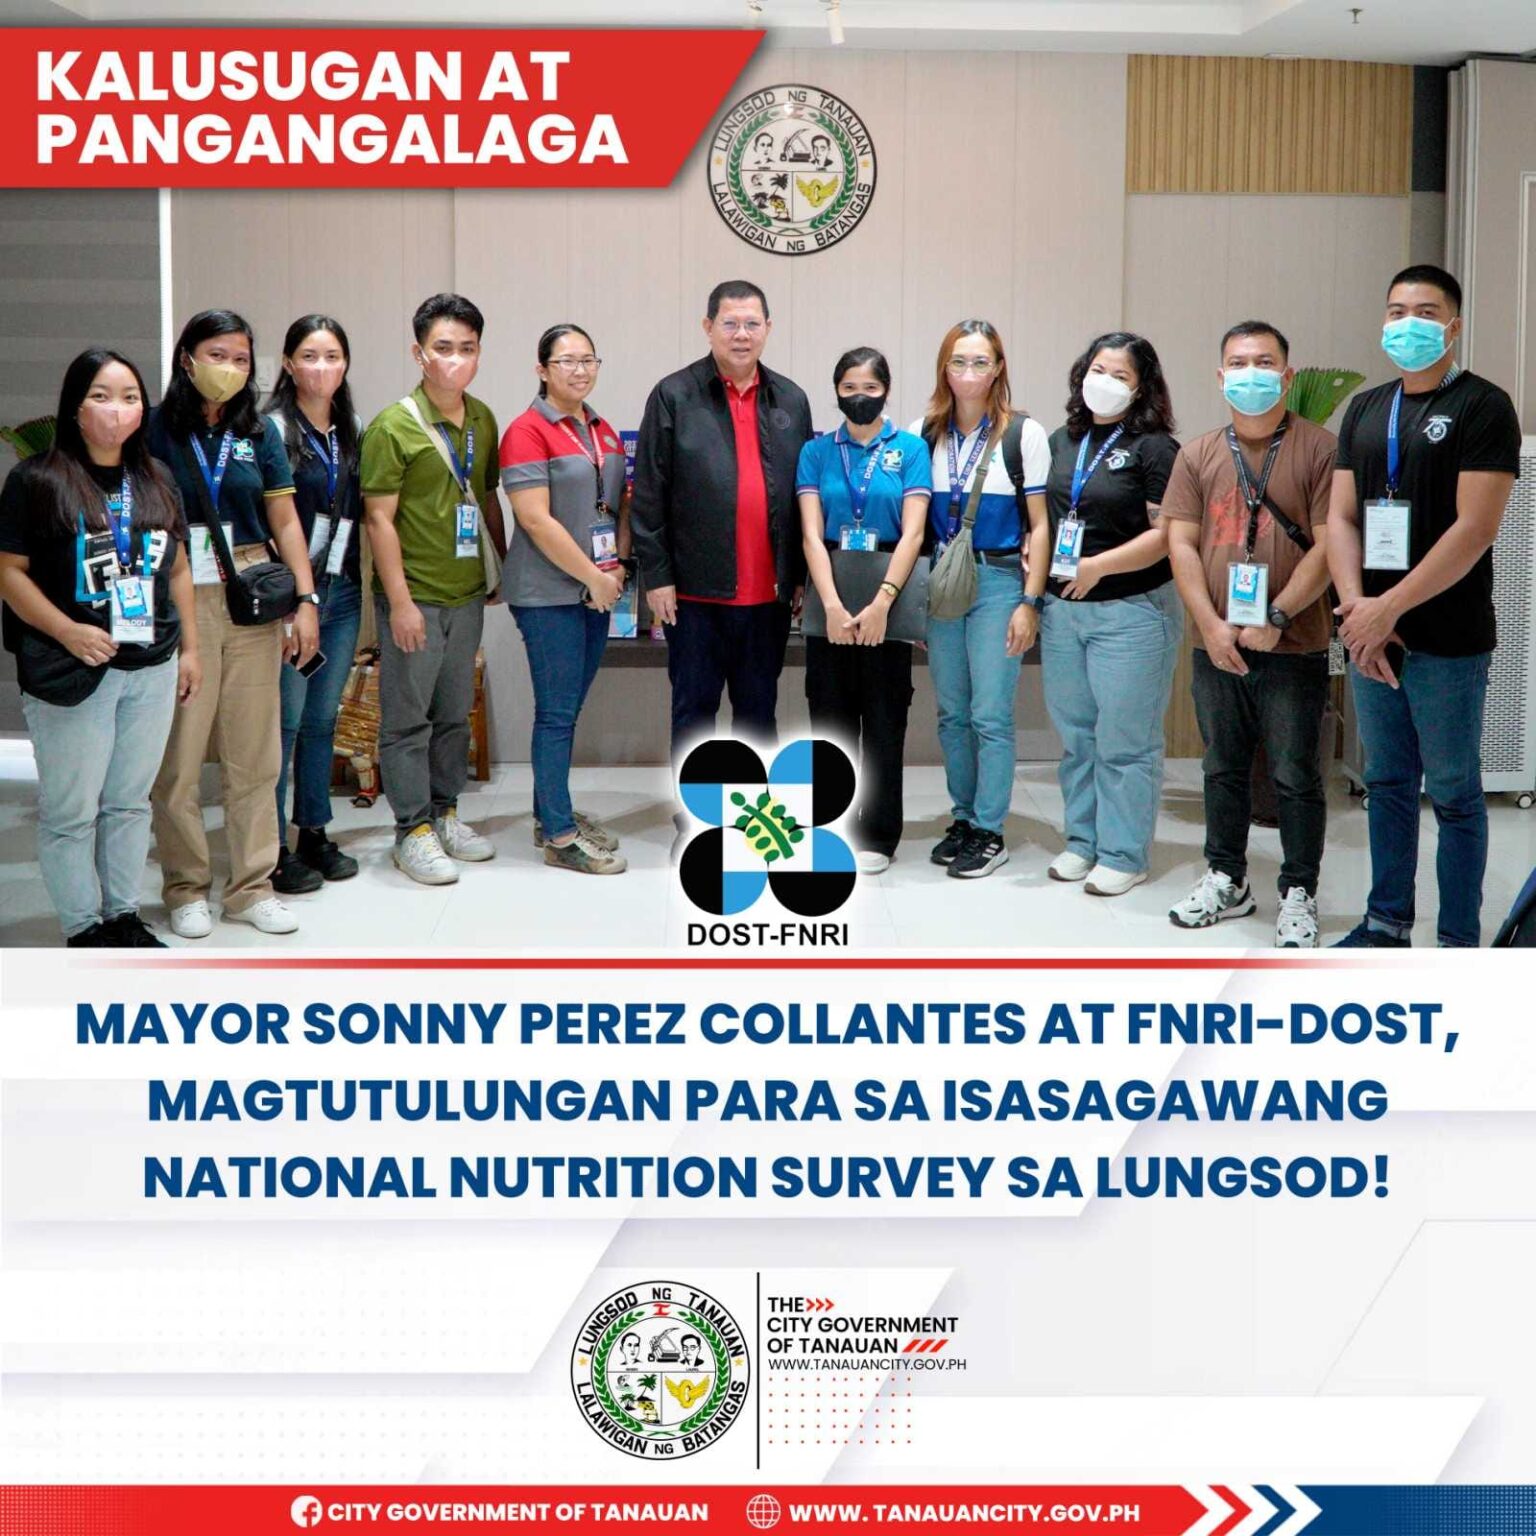 food and nutrition research institute